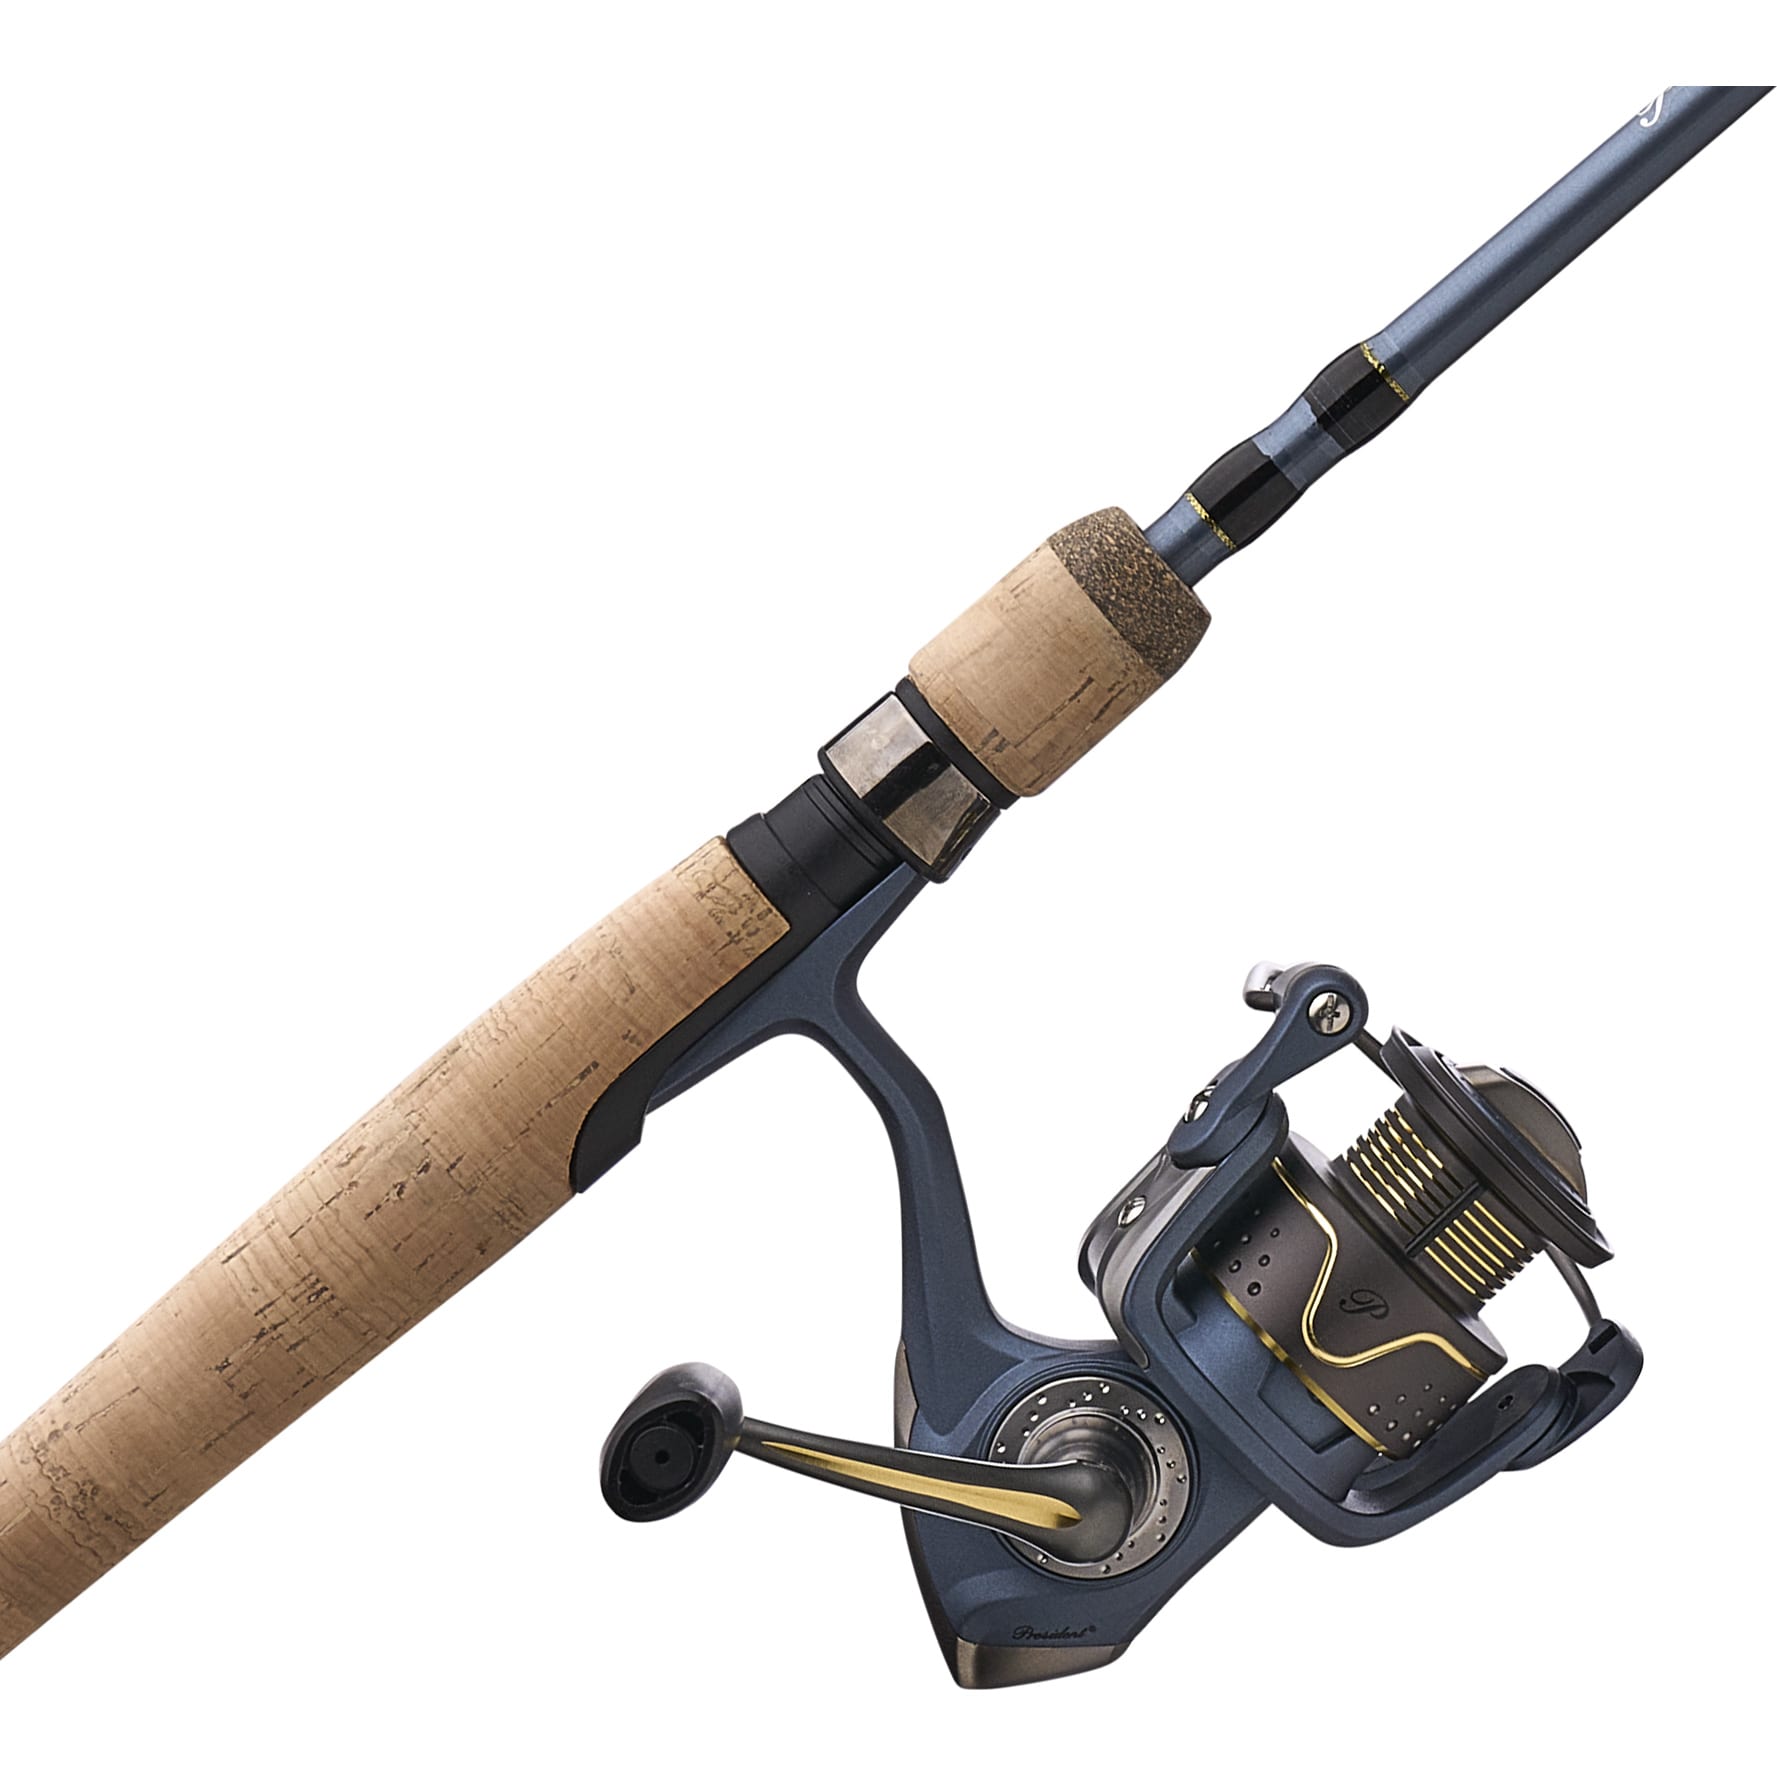 5.25 in - Poles, Rods & Reels - Fishing Gear - The Home Depot